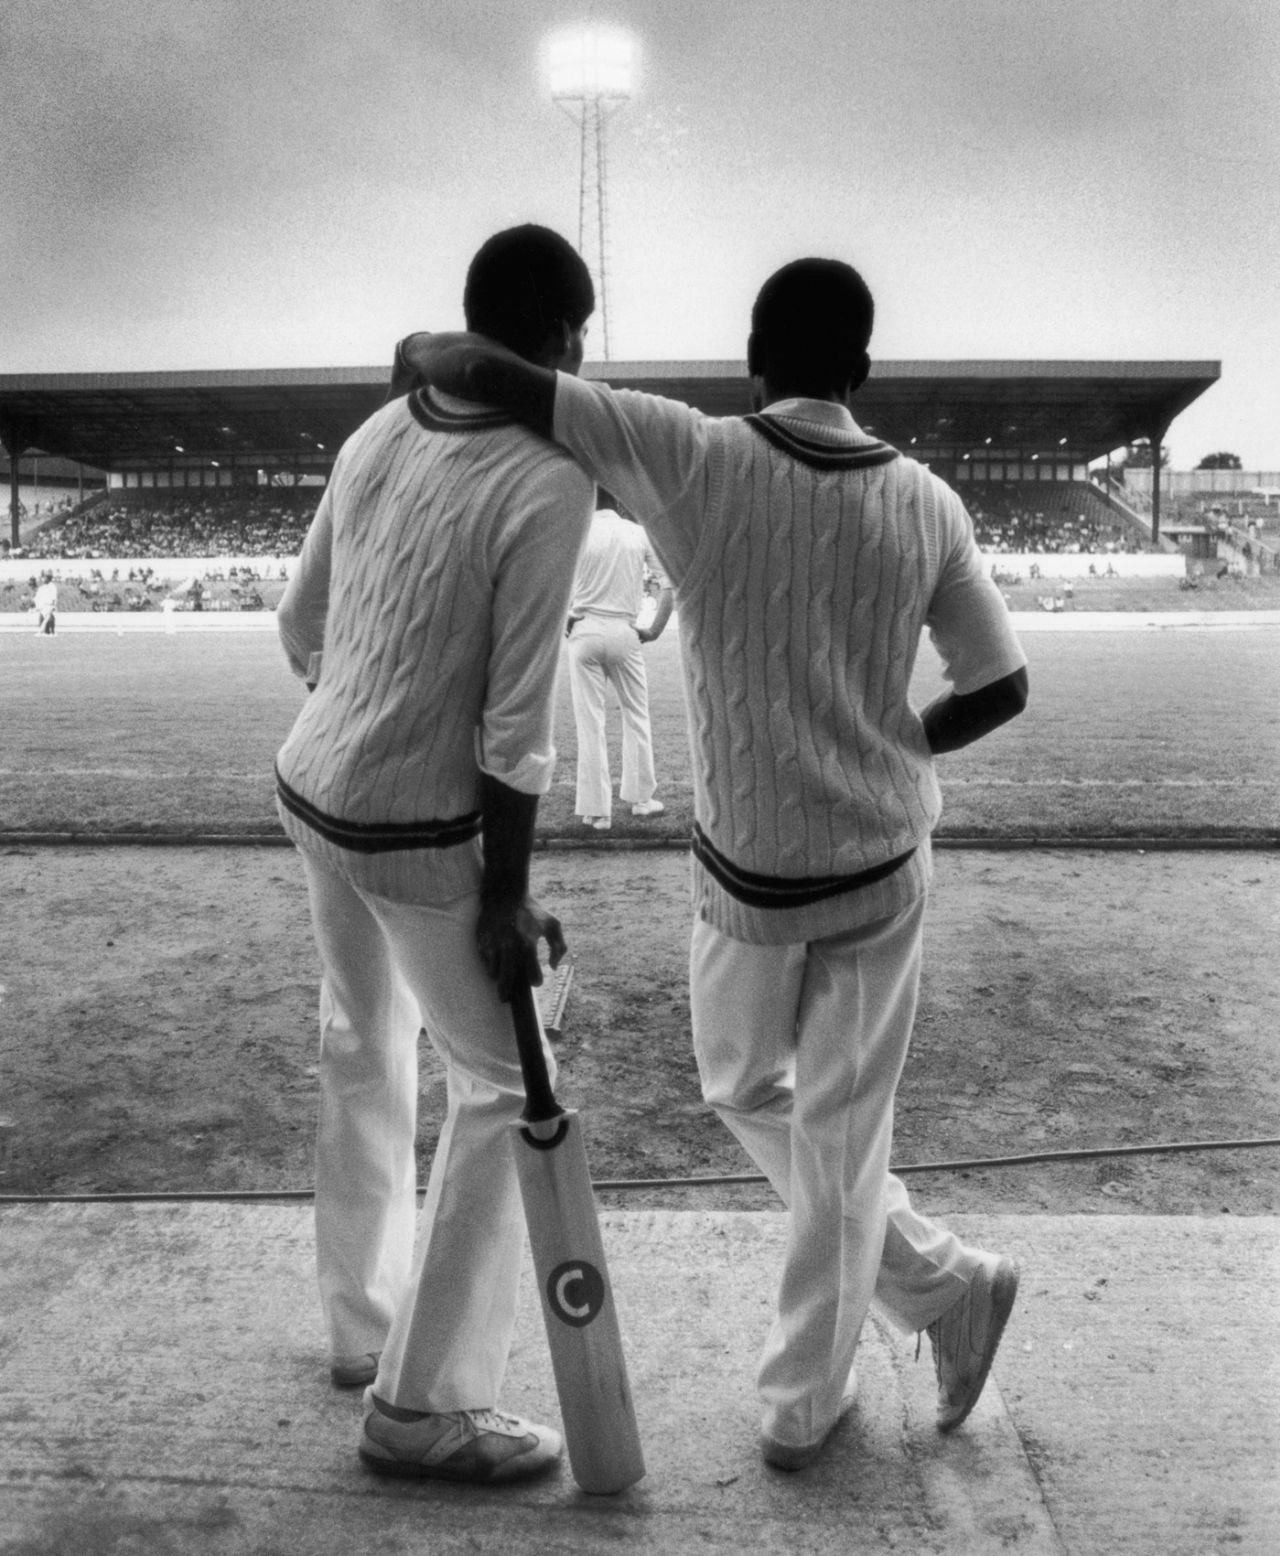 Two players look out over the pitch during the floodlit match between Essex and West Indies, Stamford Bridge, August 14, 1980